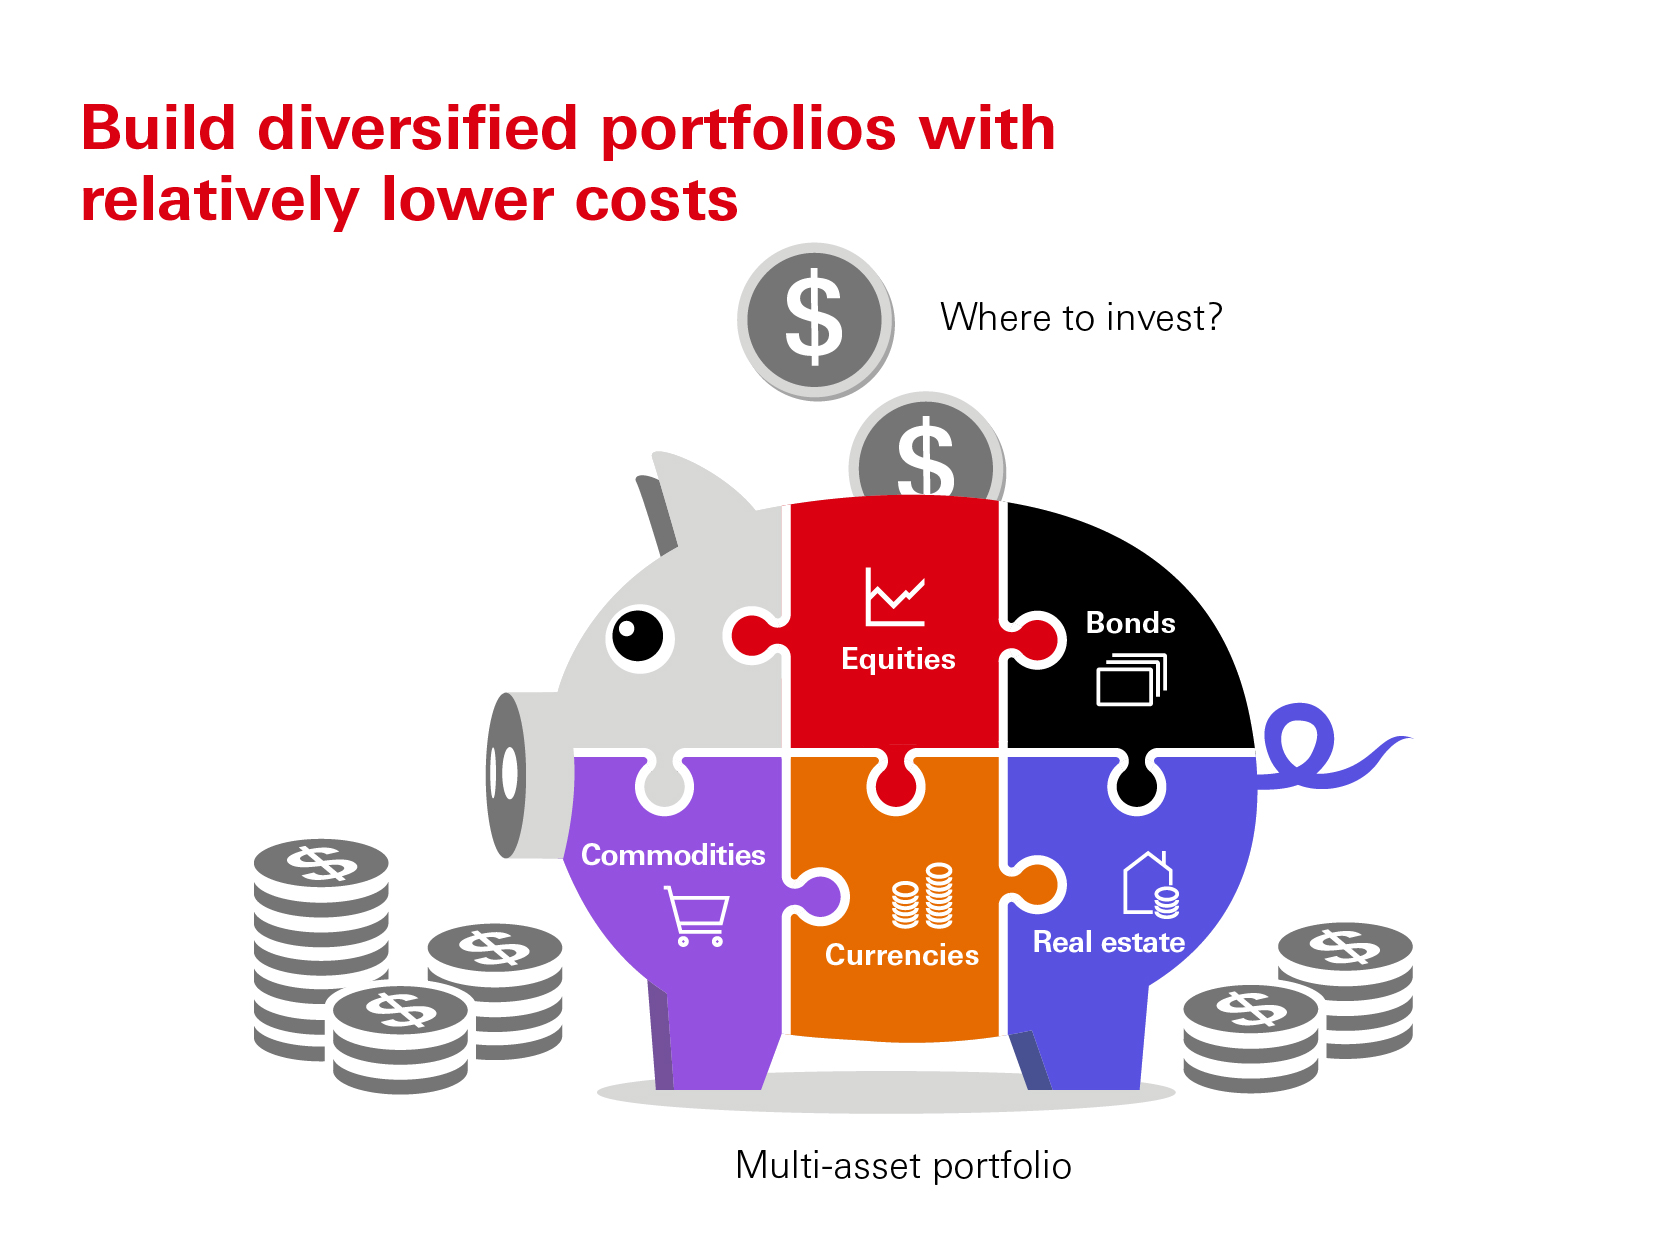 A multi-asset portfolio helps withstand market shocks. But its construction entails good understanding of a huge variety of financial instruments from around the world.